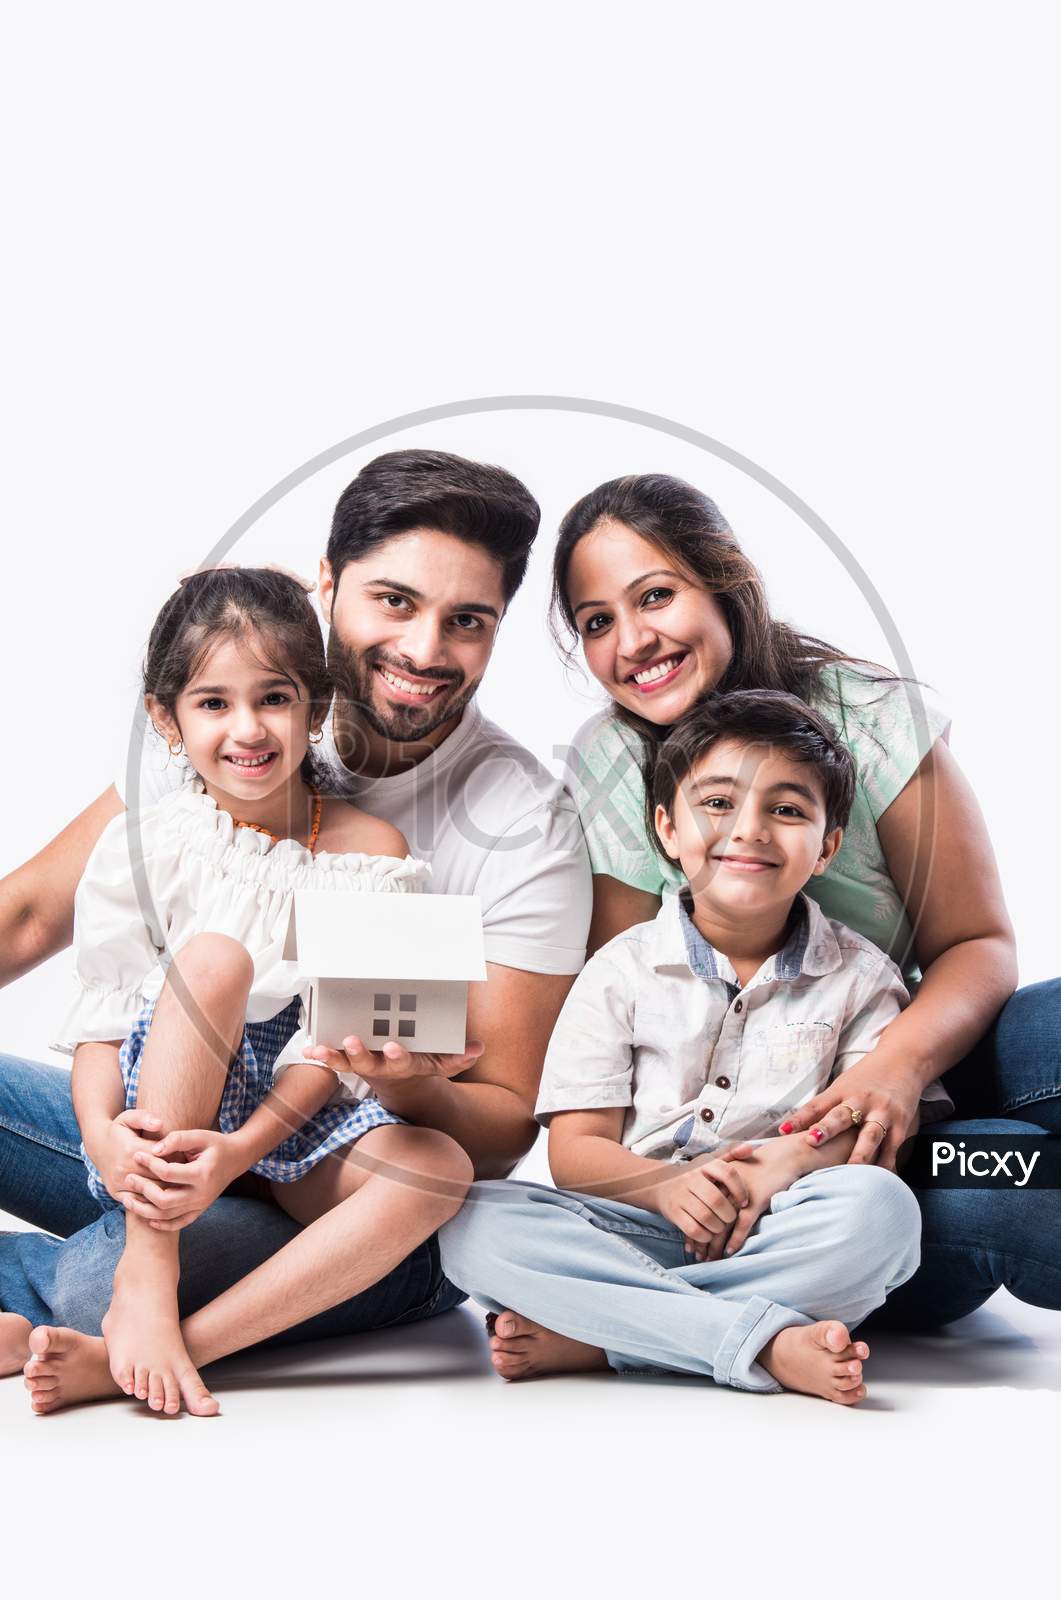 Real Estate Concept - Indian Happy And Young Family Of Four Holding 3D Paper Model Of Home